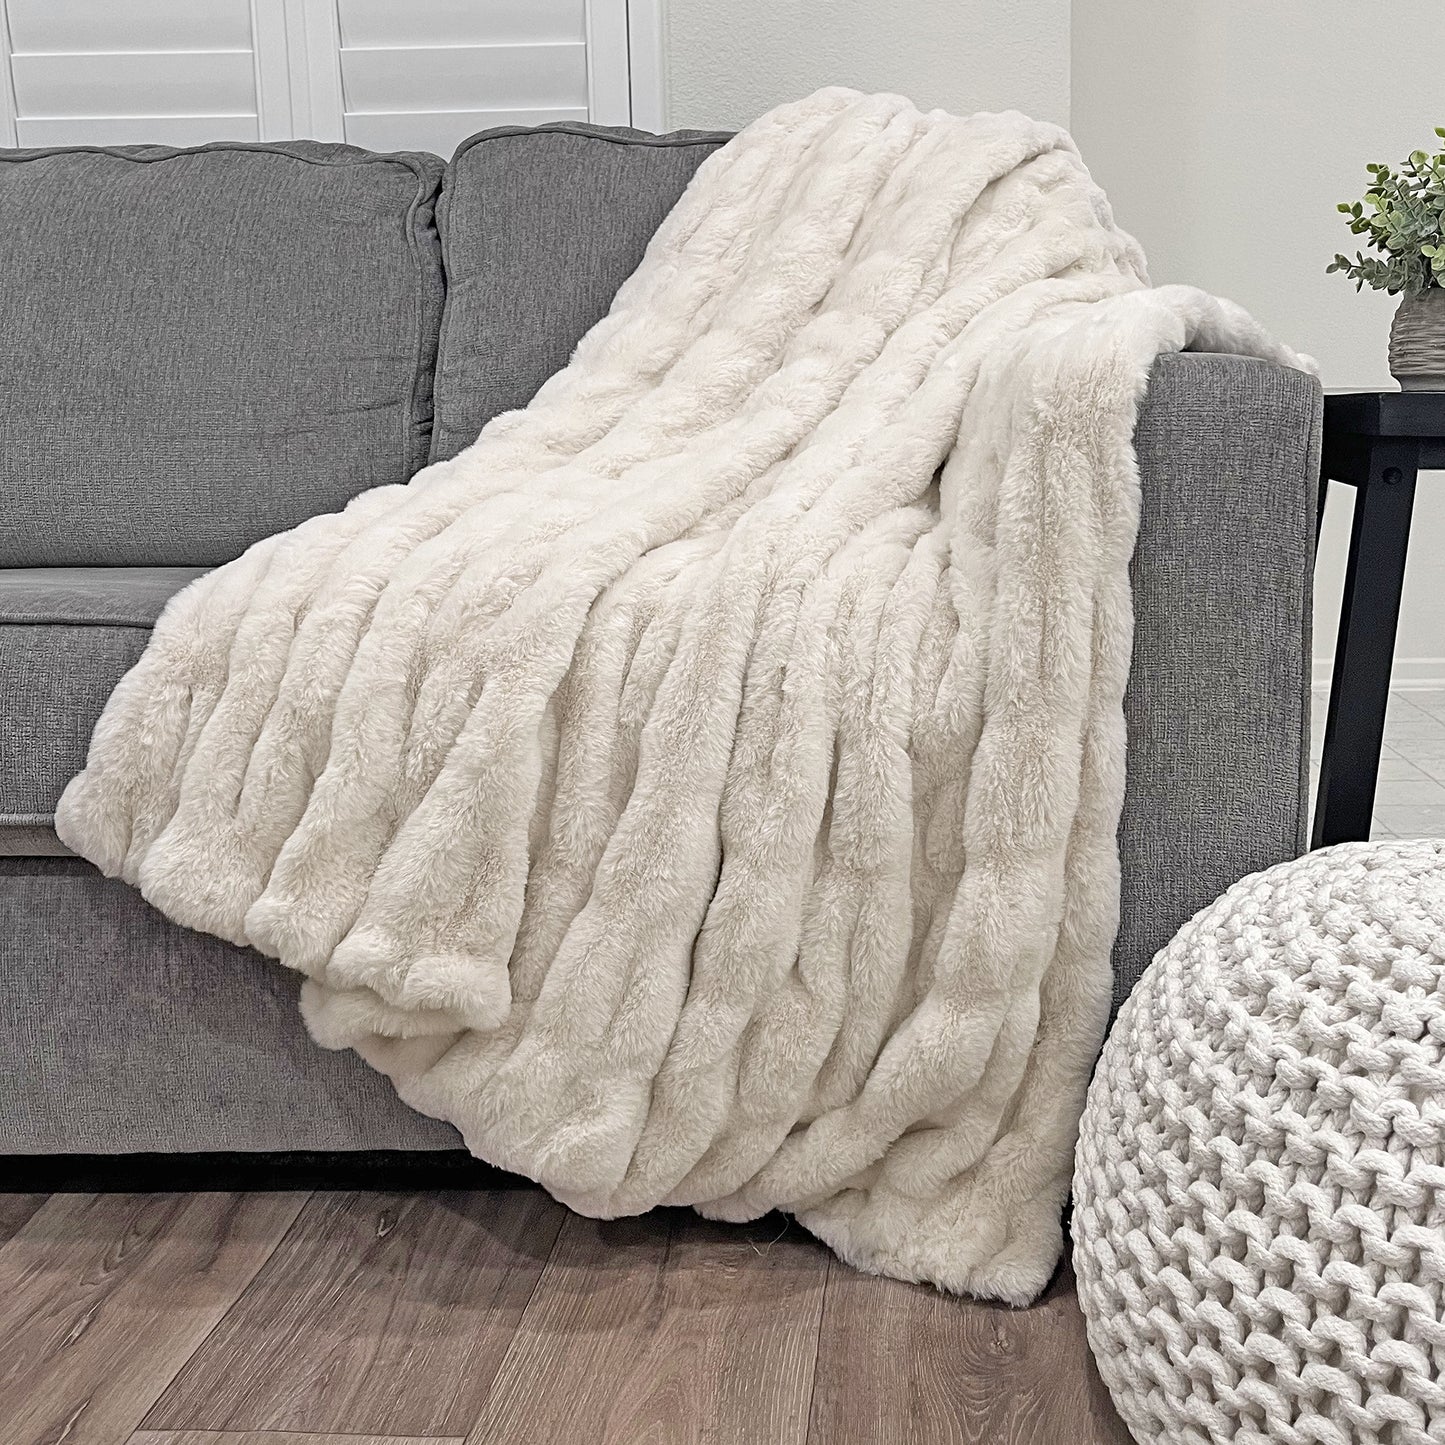  The Mood Mallow Faux Fur Throw, 50x60 in., Coconut (Beige)